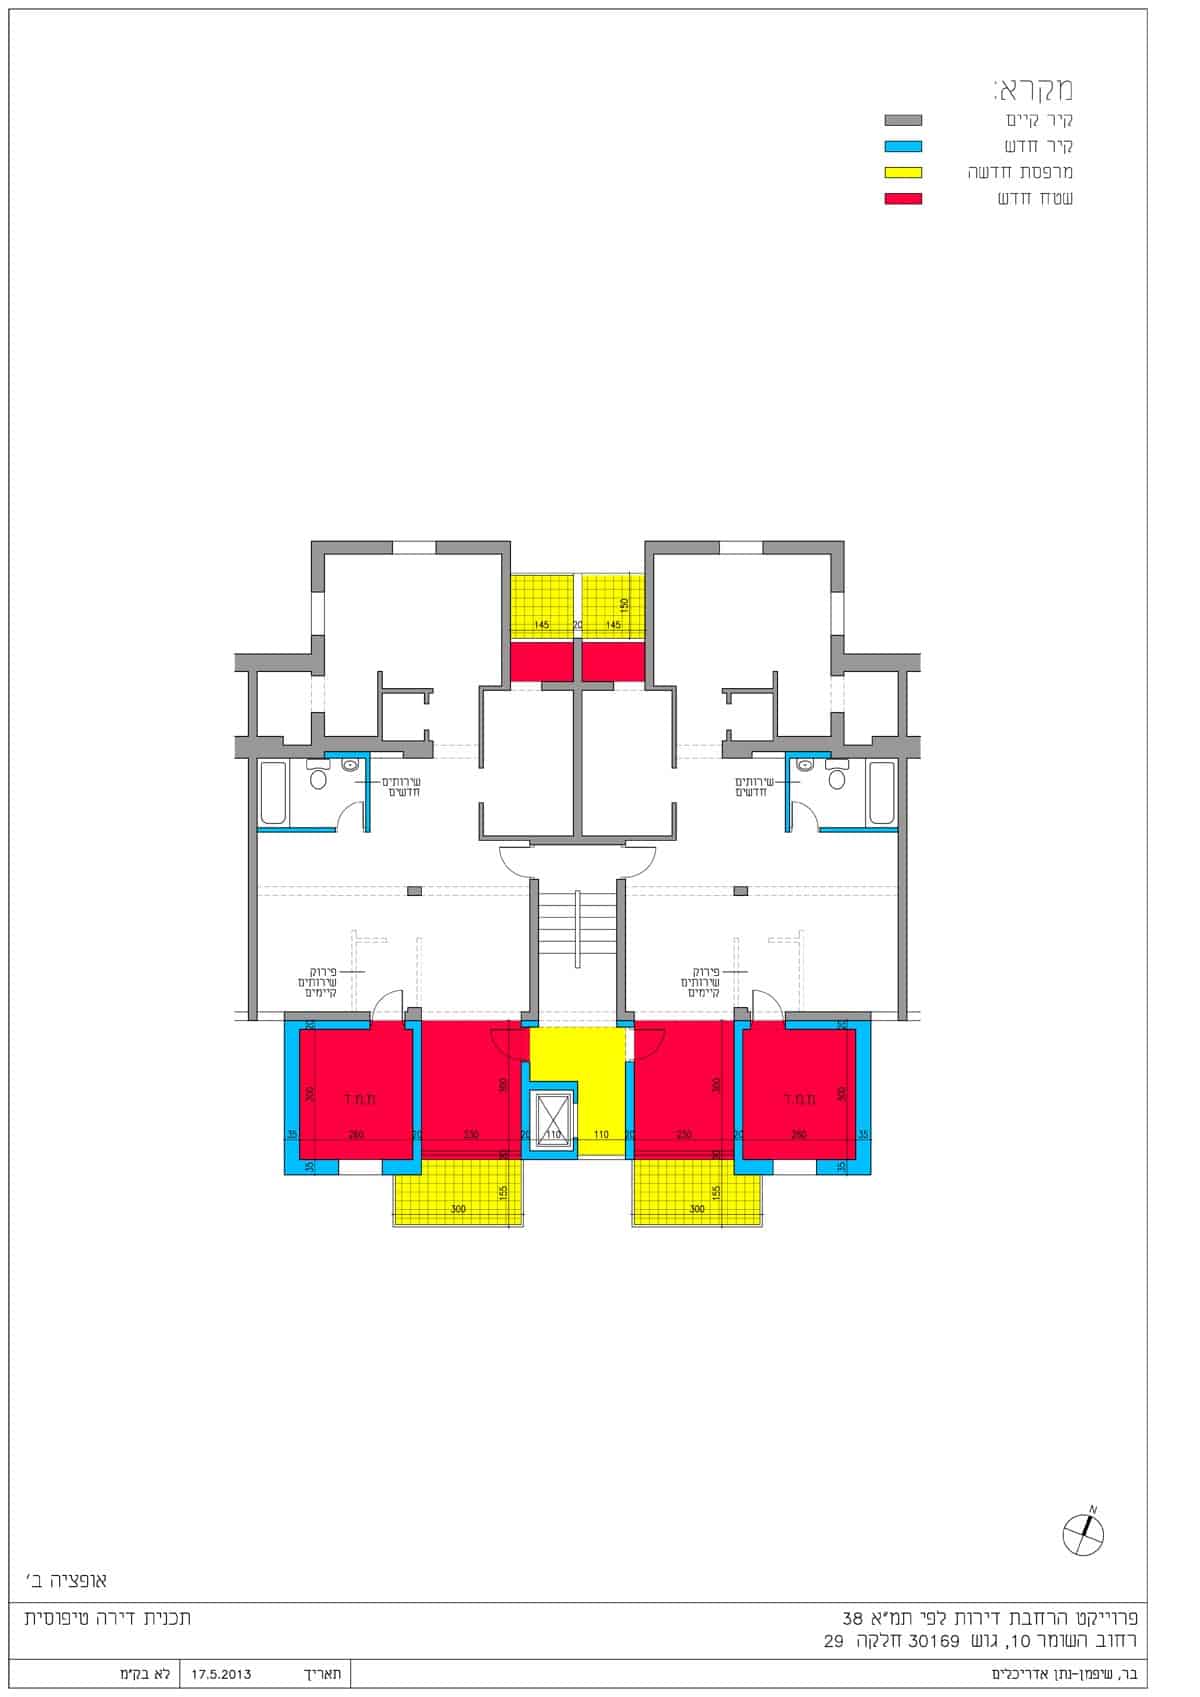 HaShomer 10, Jerusalem – Typical apartment plan in Tama 38 project